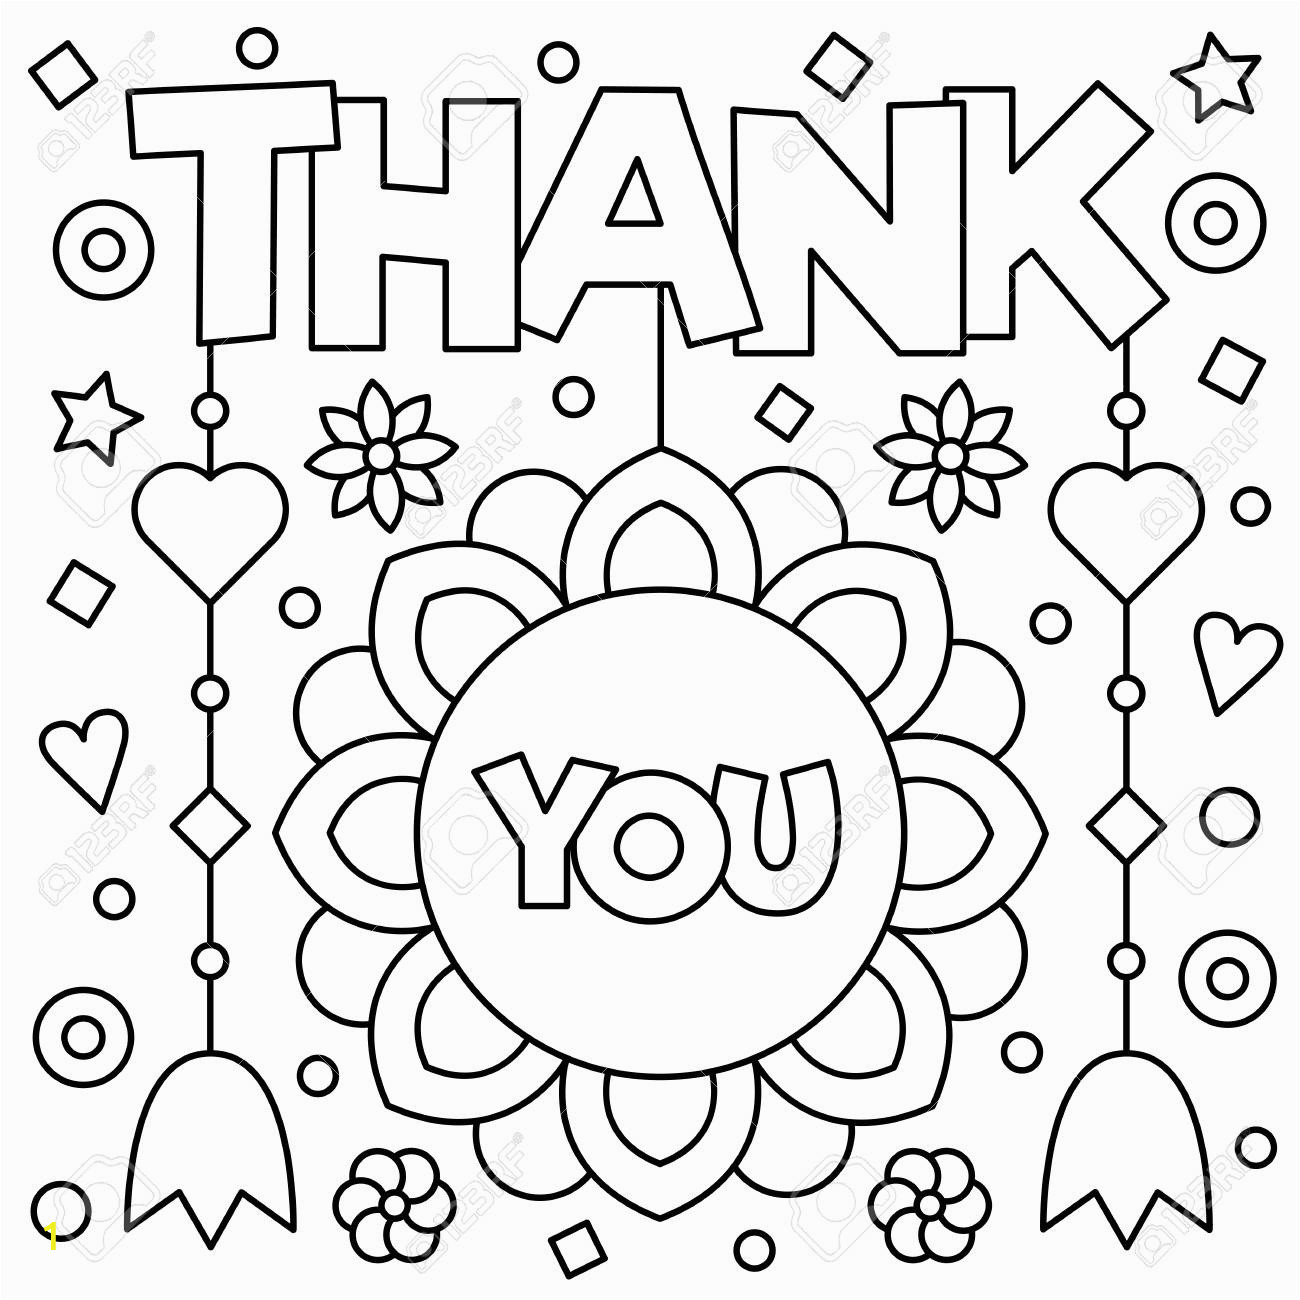 thank you coloring page black and white vector illustration